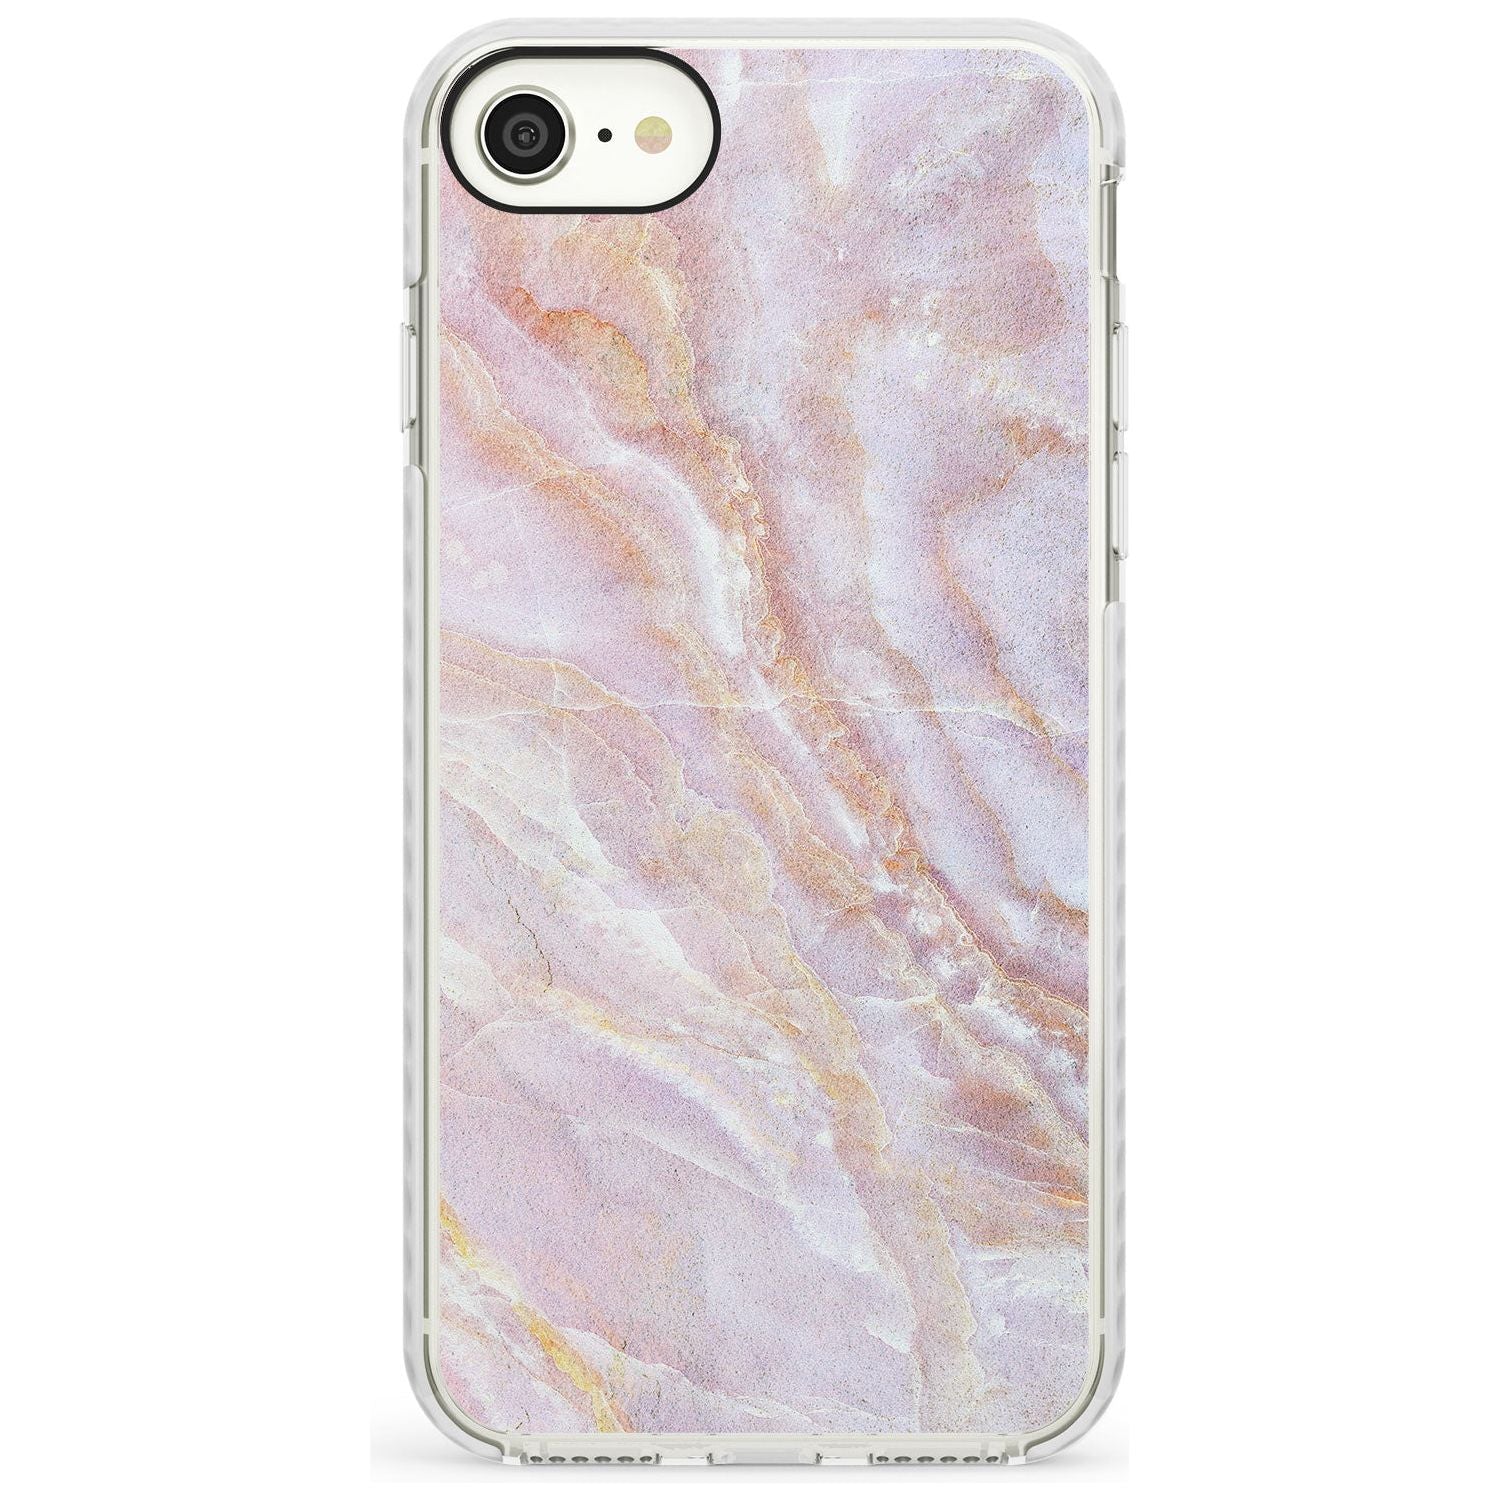 Soft Pink & Yellow Onyx Marble Texture Slim TPU Phone Case for iPhone SE 8 7 Plus